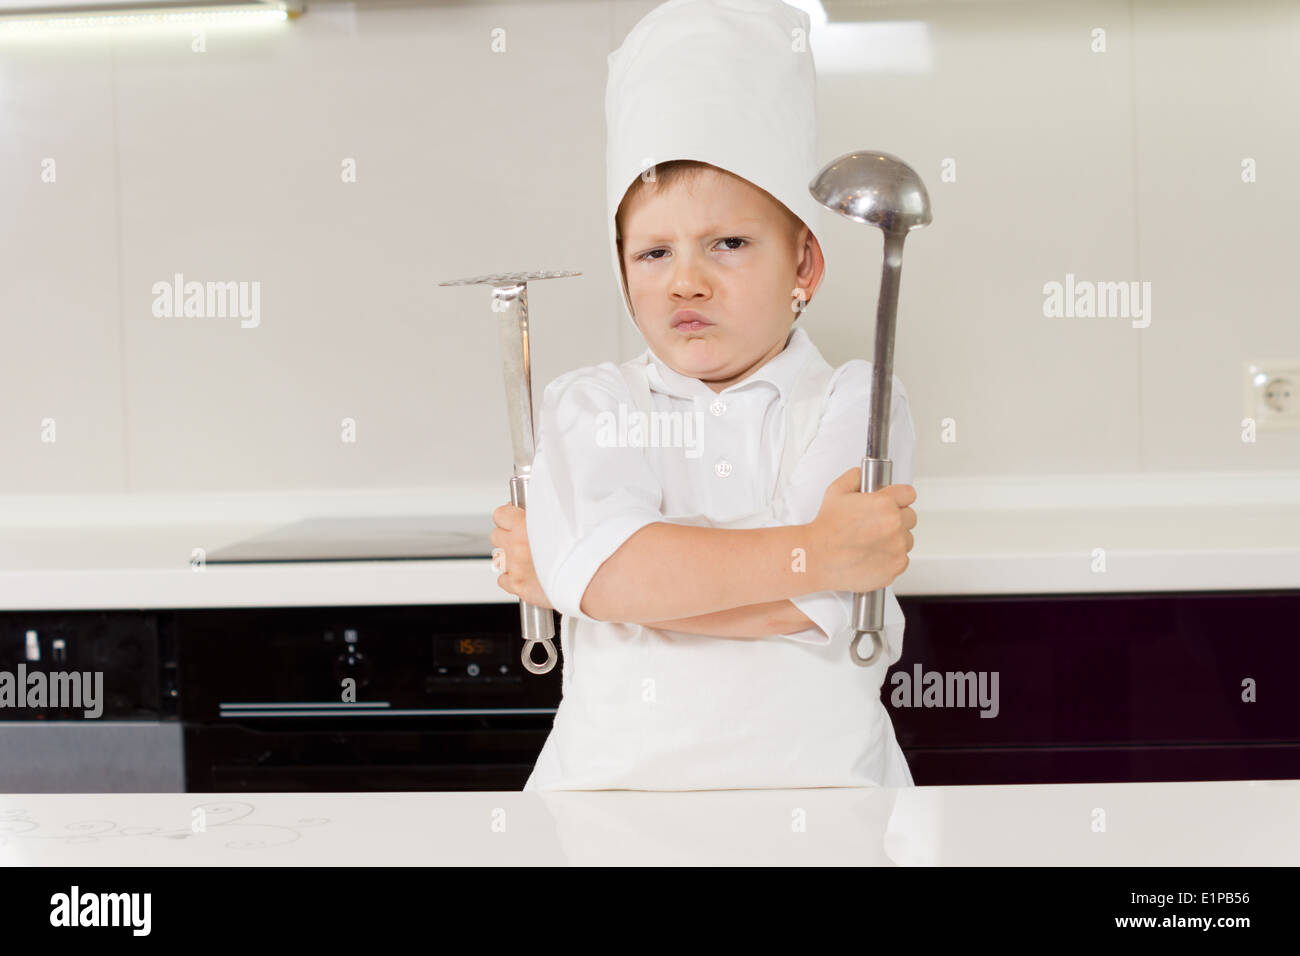 Young boy chef protecting his secret recipe standing gripping his utensils with folded arms and a pugnacious expression Stock Photo